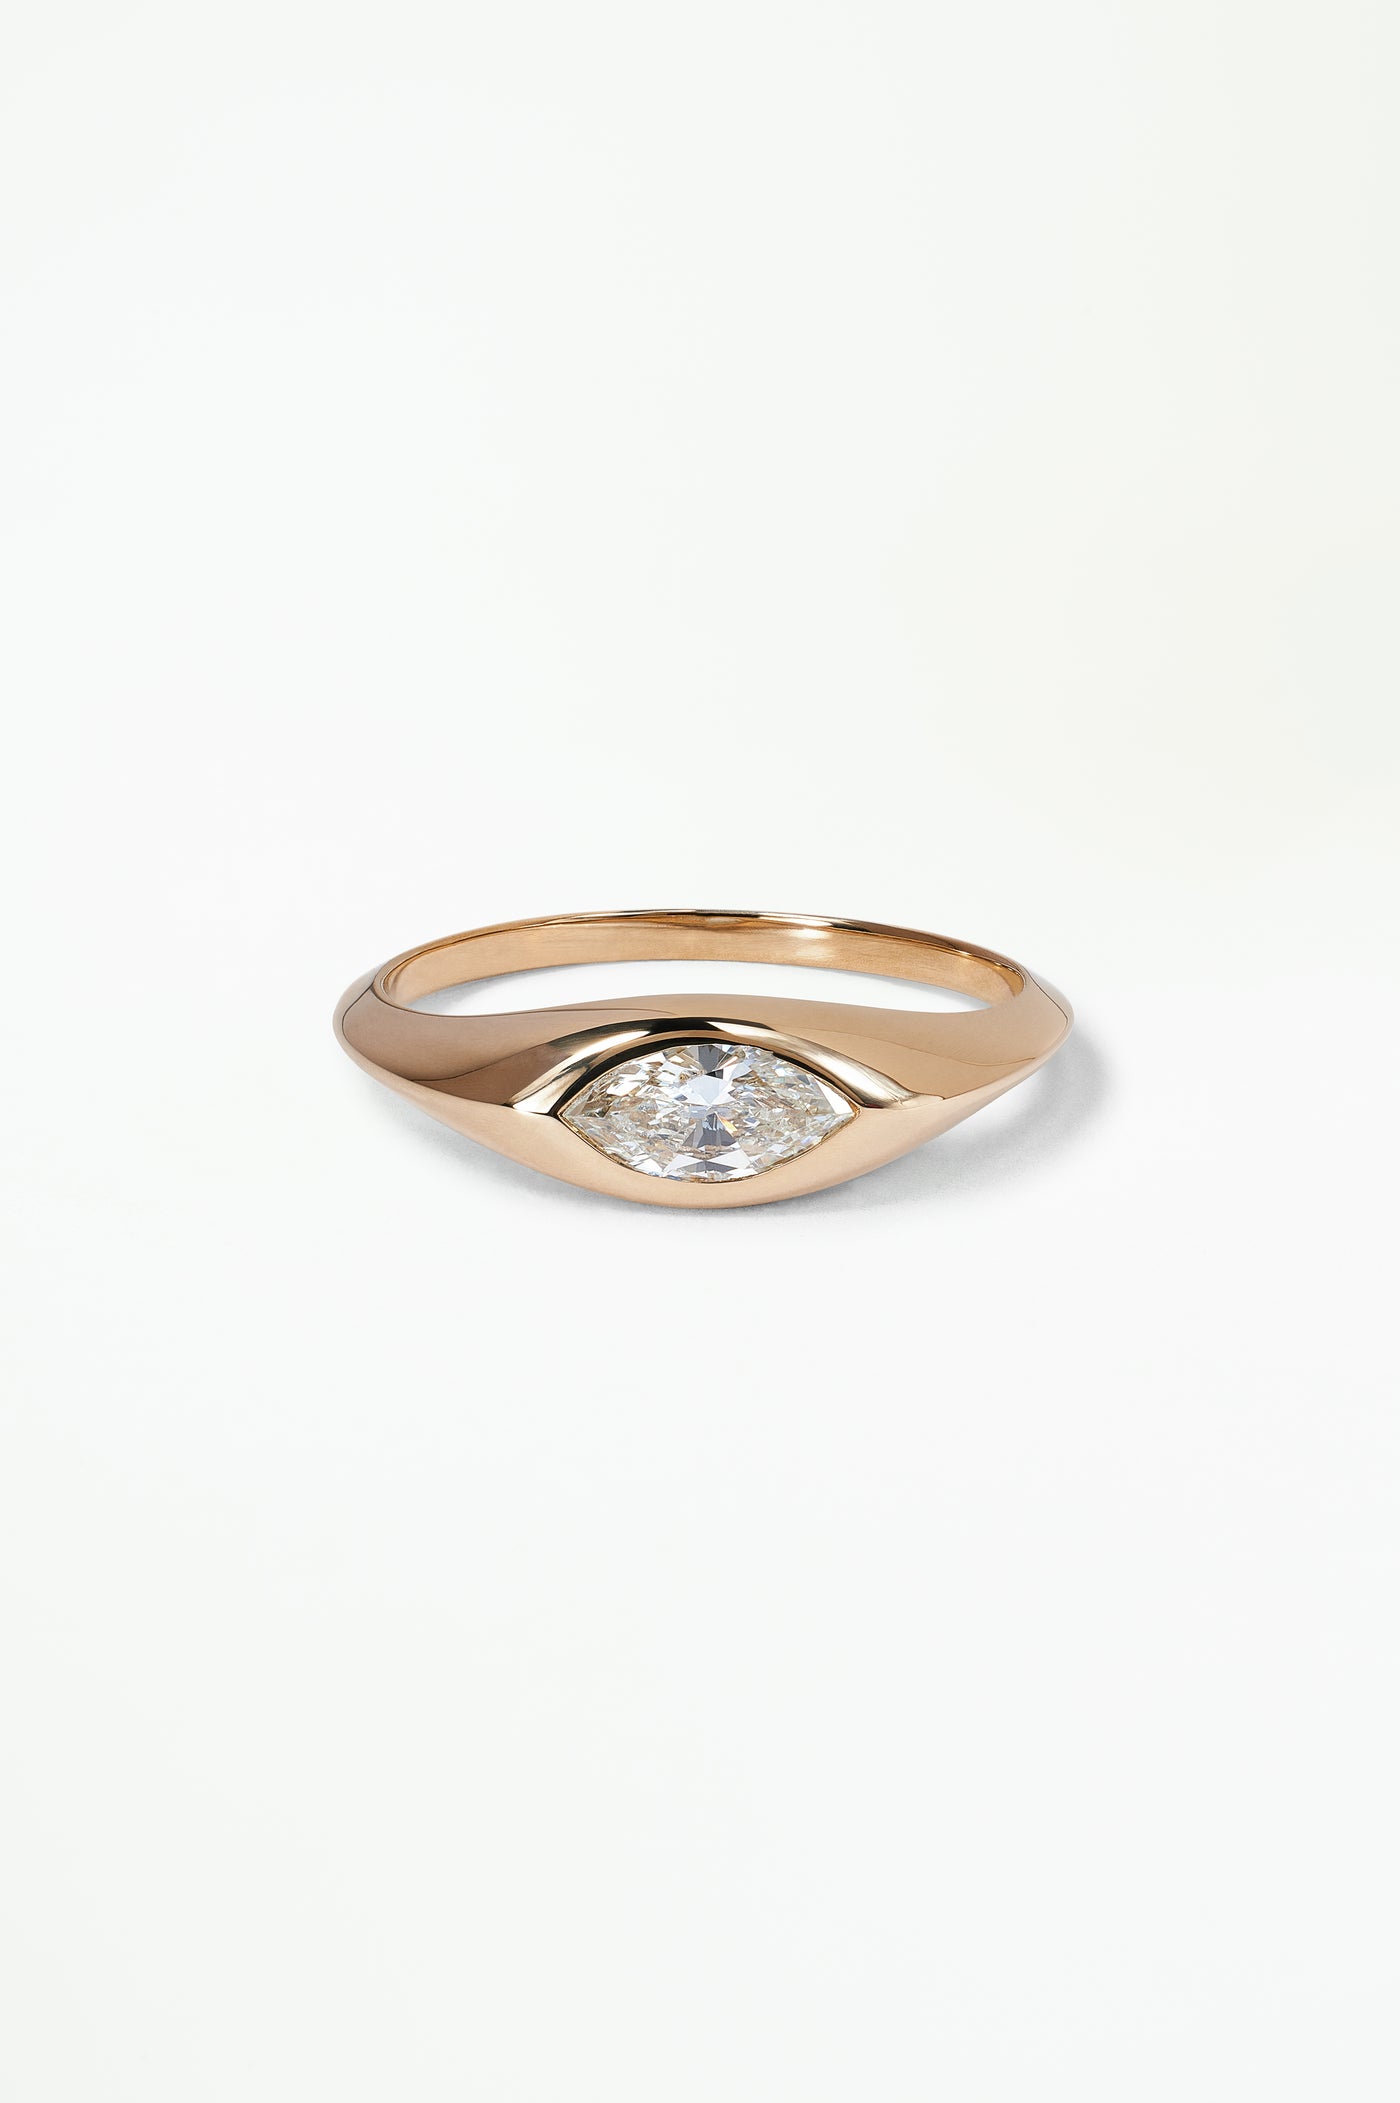 One of a Kind Marquise Cut Diamond Signet Ring No. 30